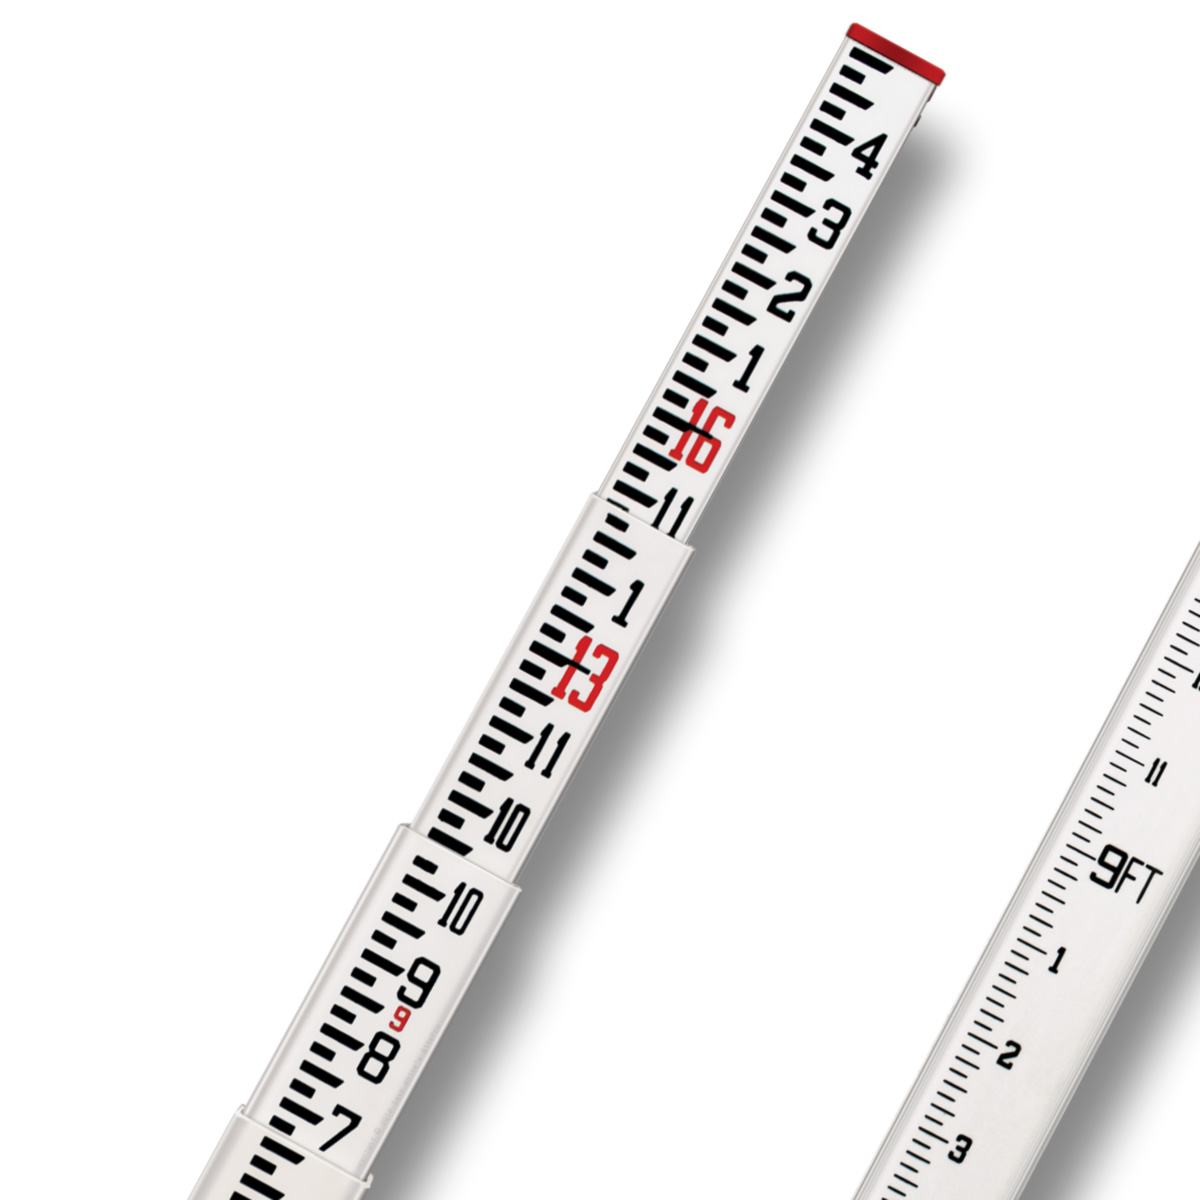 SitePro 16 Ft Inches Fiberglass Leveling Rod (CR-type) 11-916-C - Click Image to Close